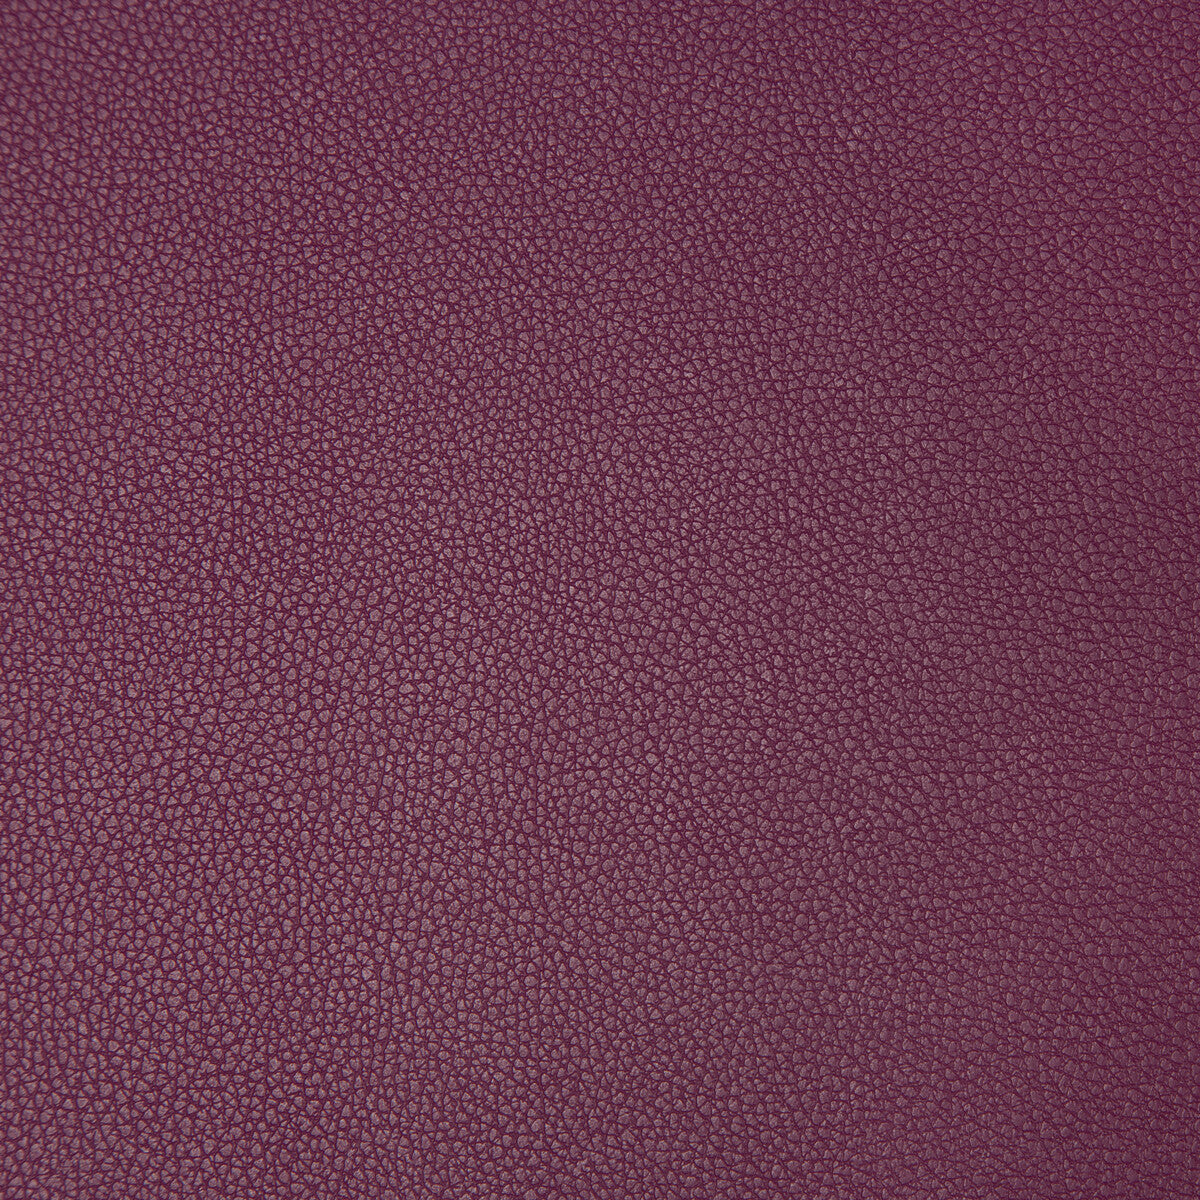 Syrus fabric in mulberry color - pattern SYRUS.910.0 - by Kravet Contract